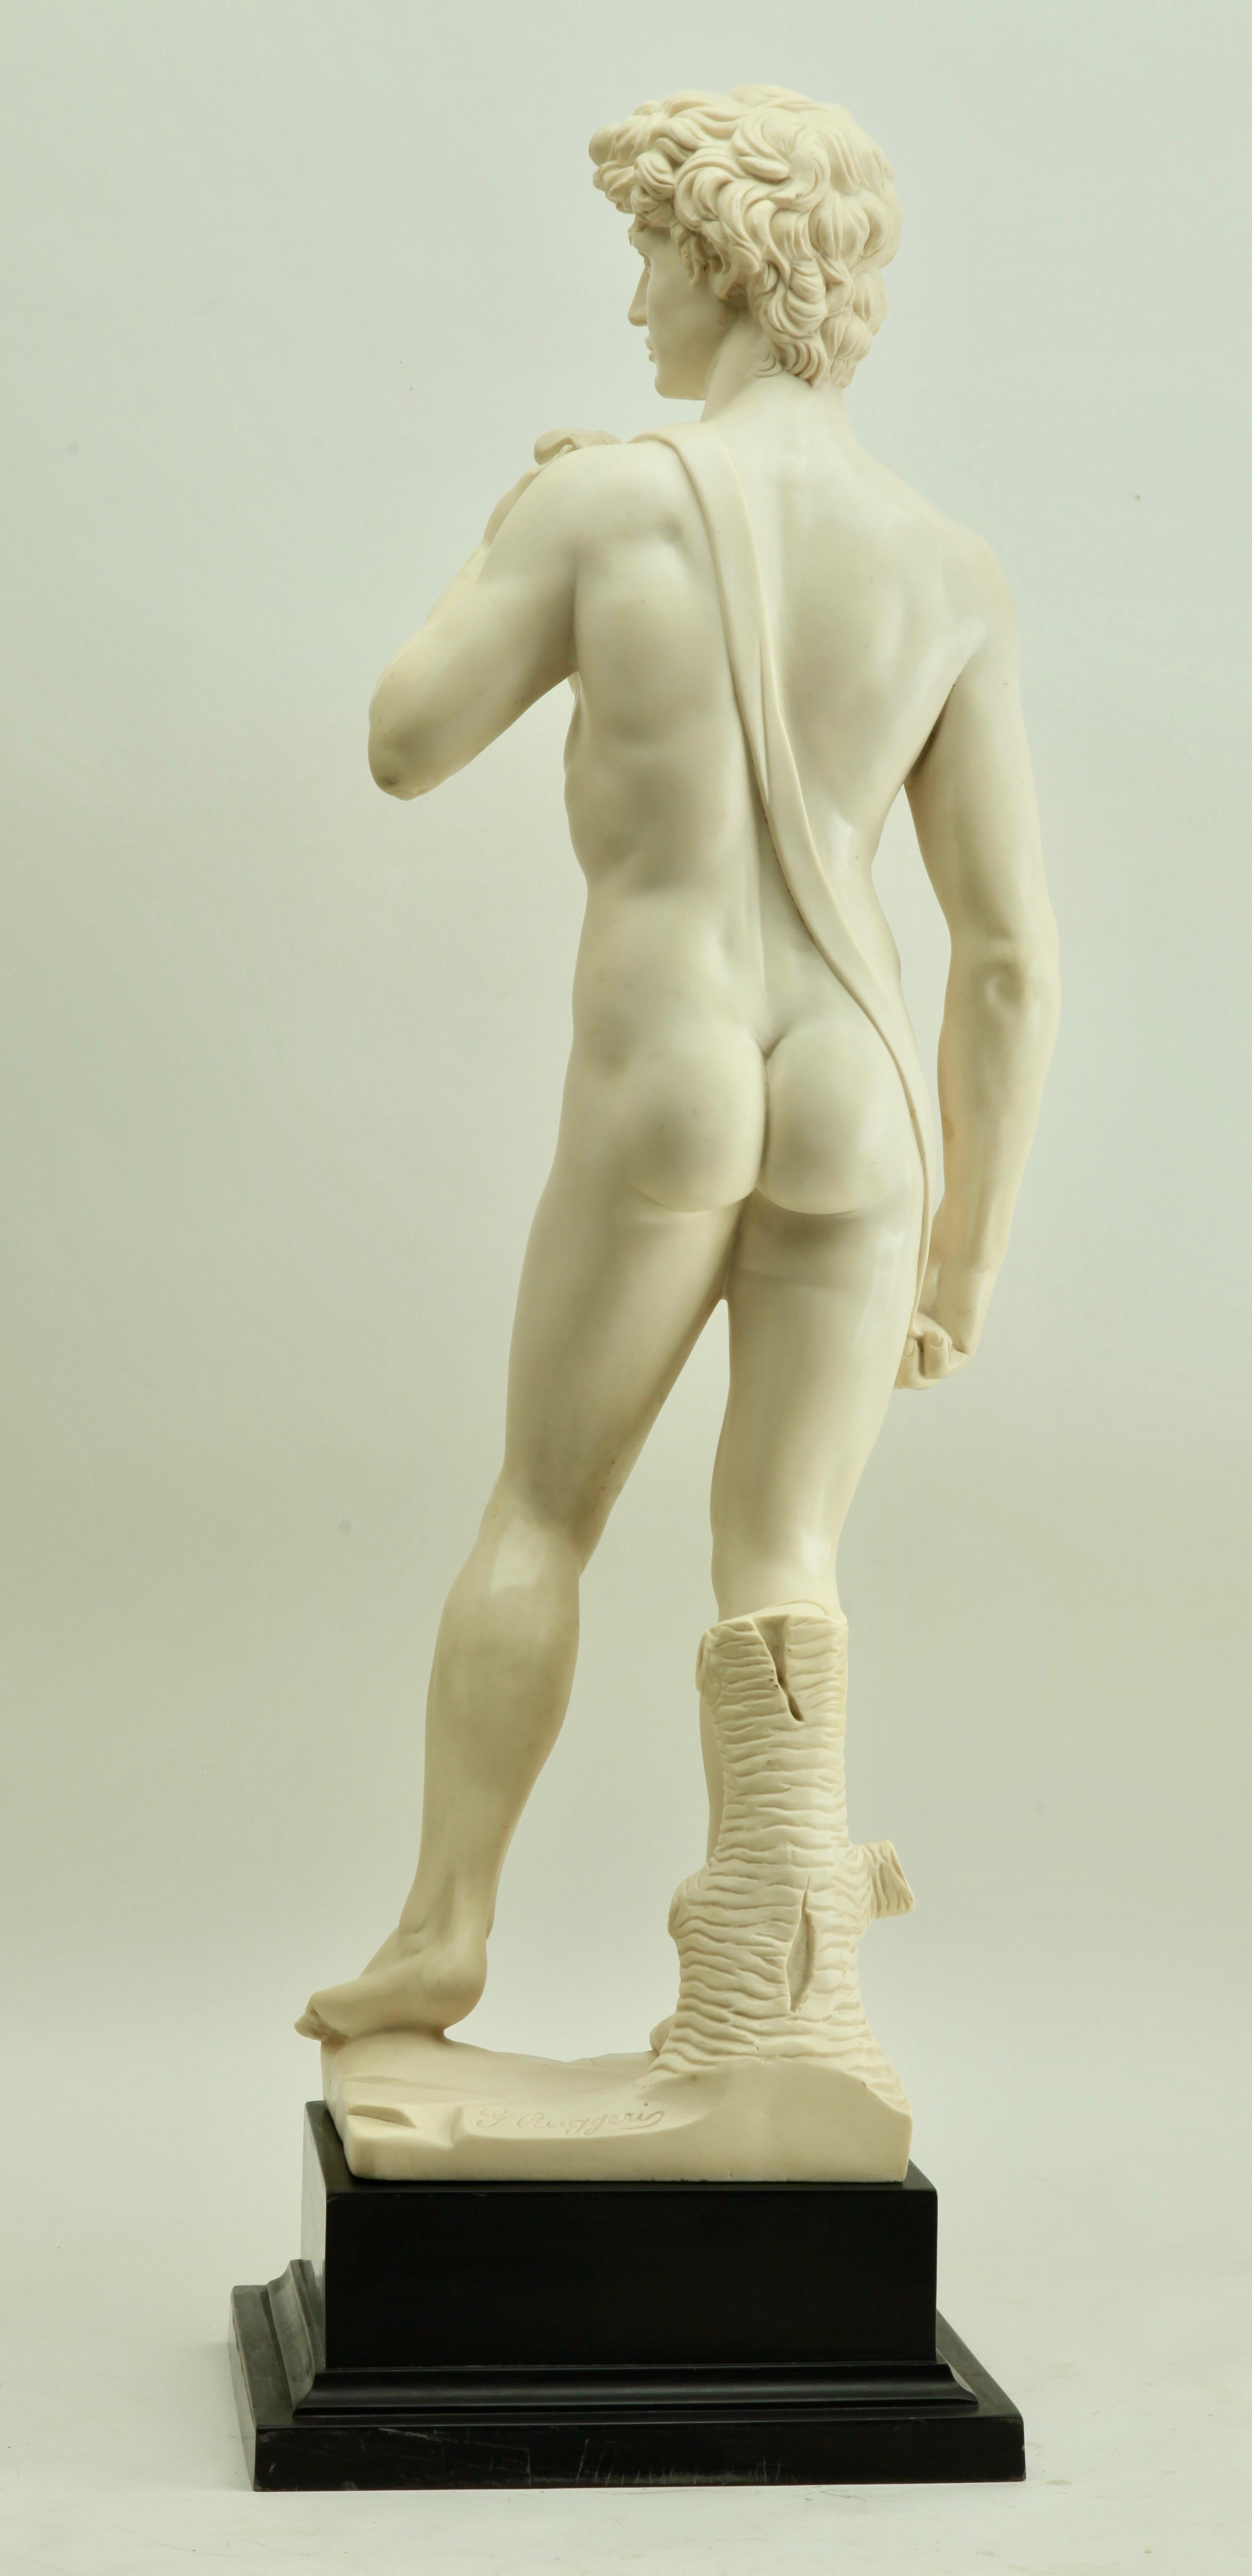 Italian Detailed and Stylized Roman Statue of the 'David' Sculpted by G Ruggeri